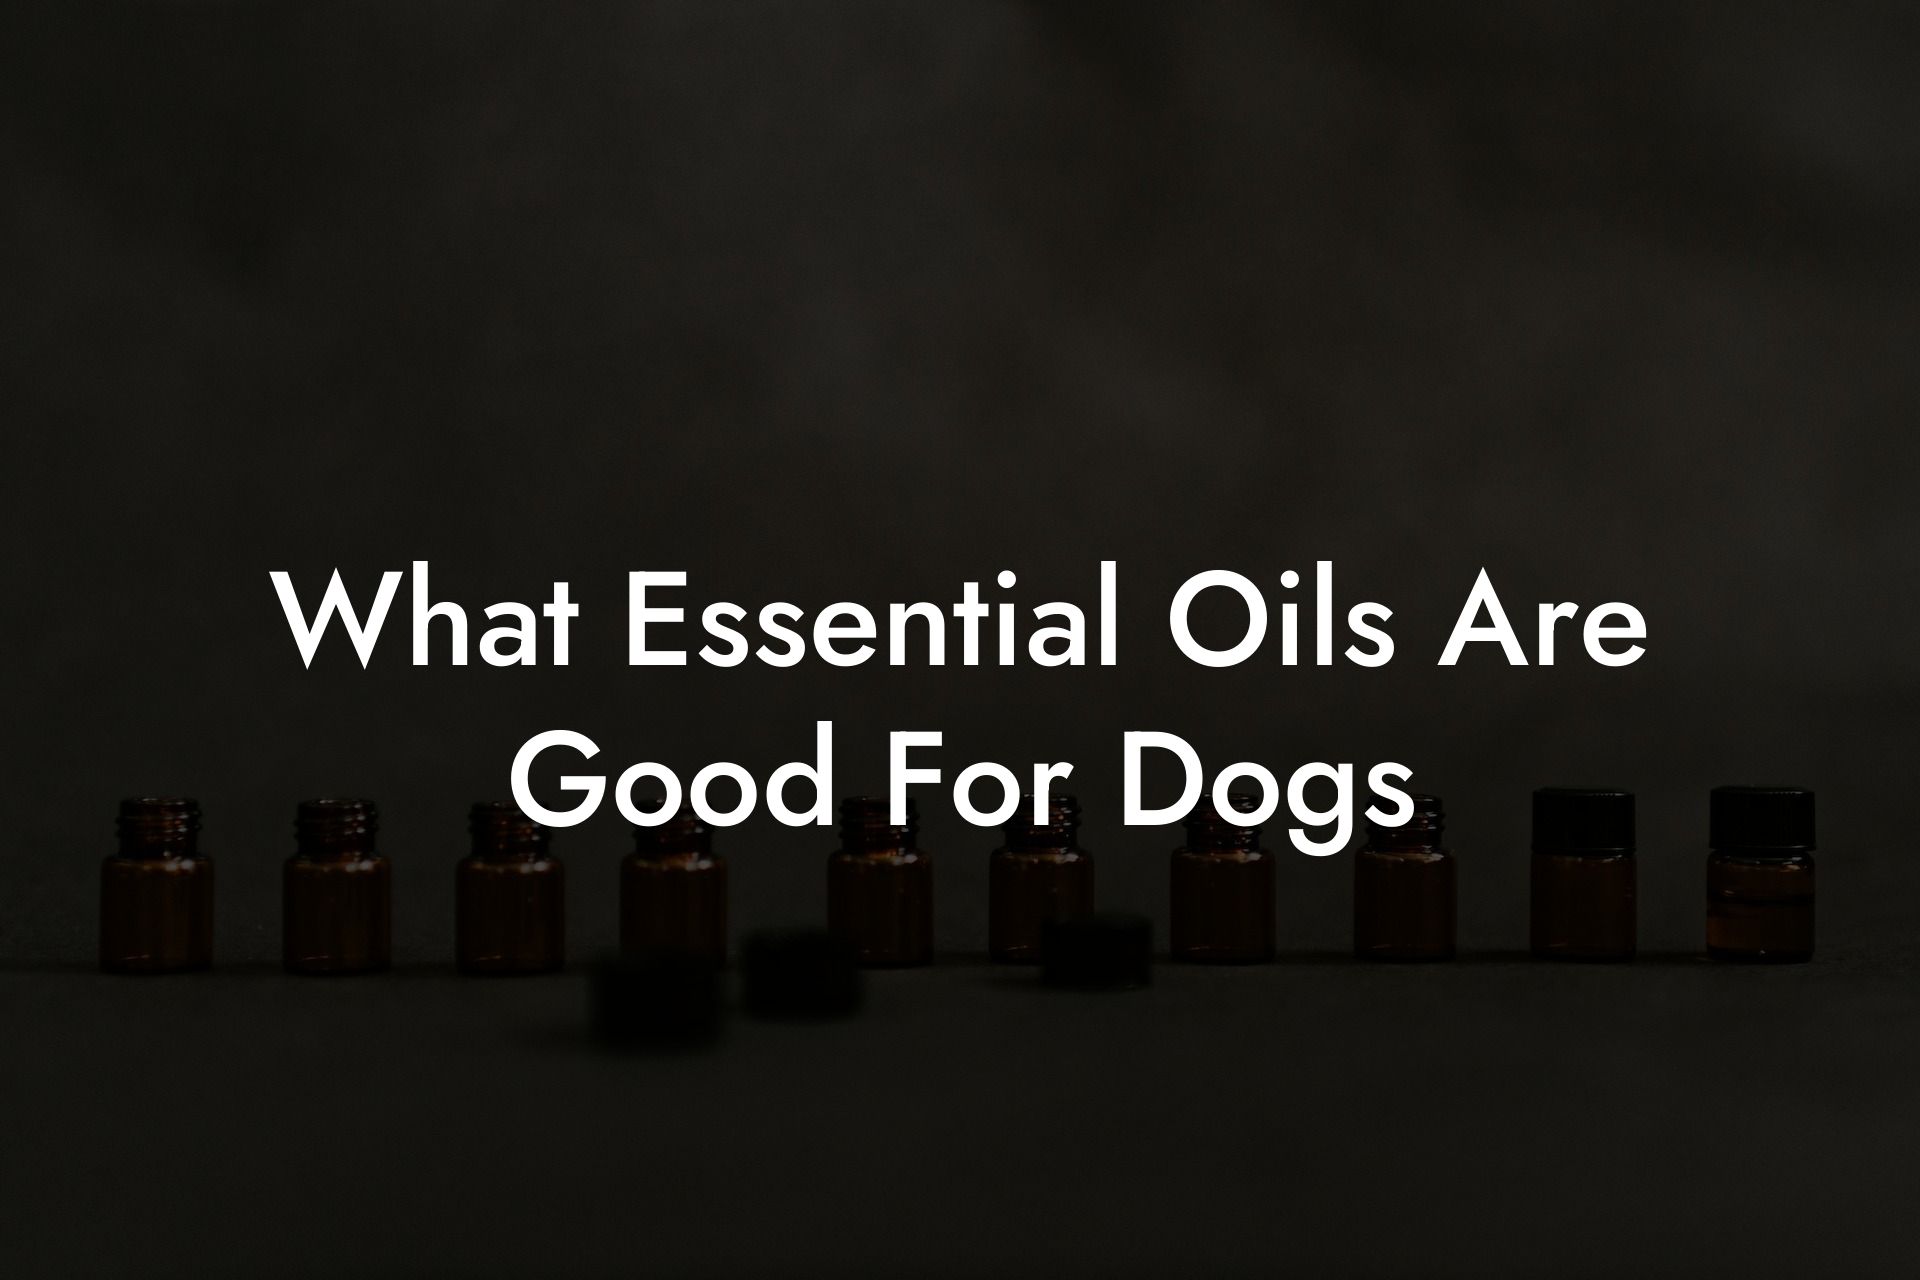 What Essential Oils Are Good For Dogs